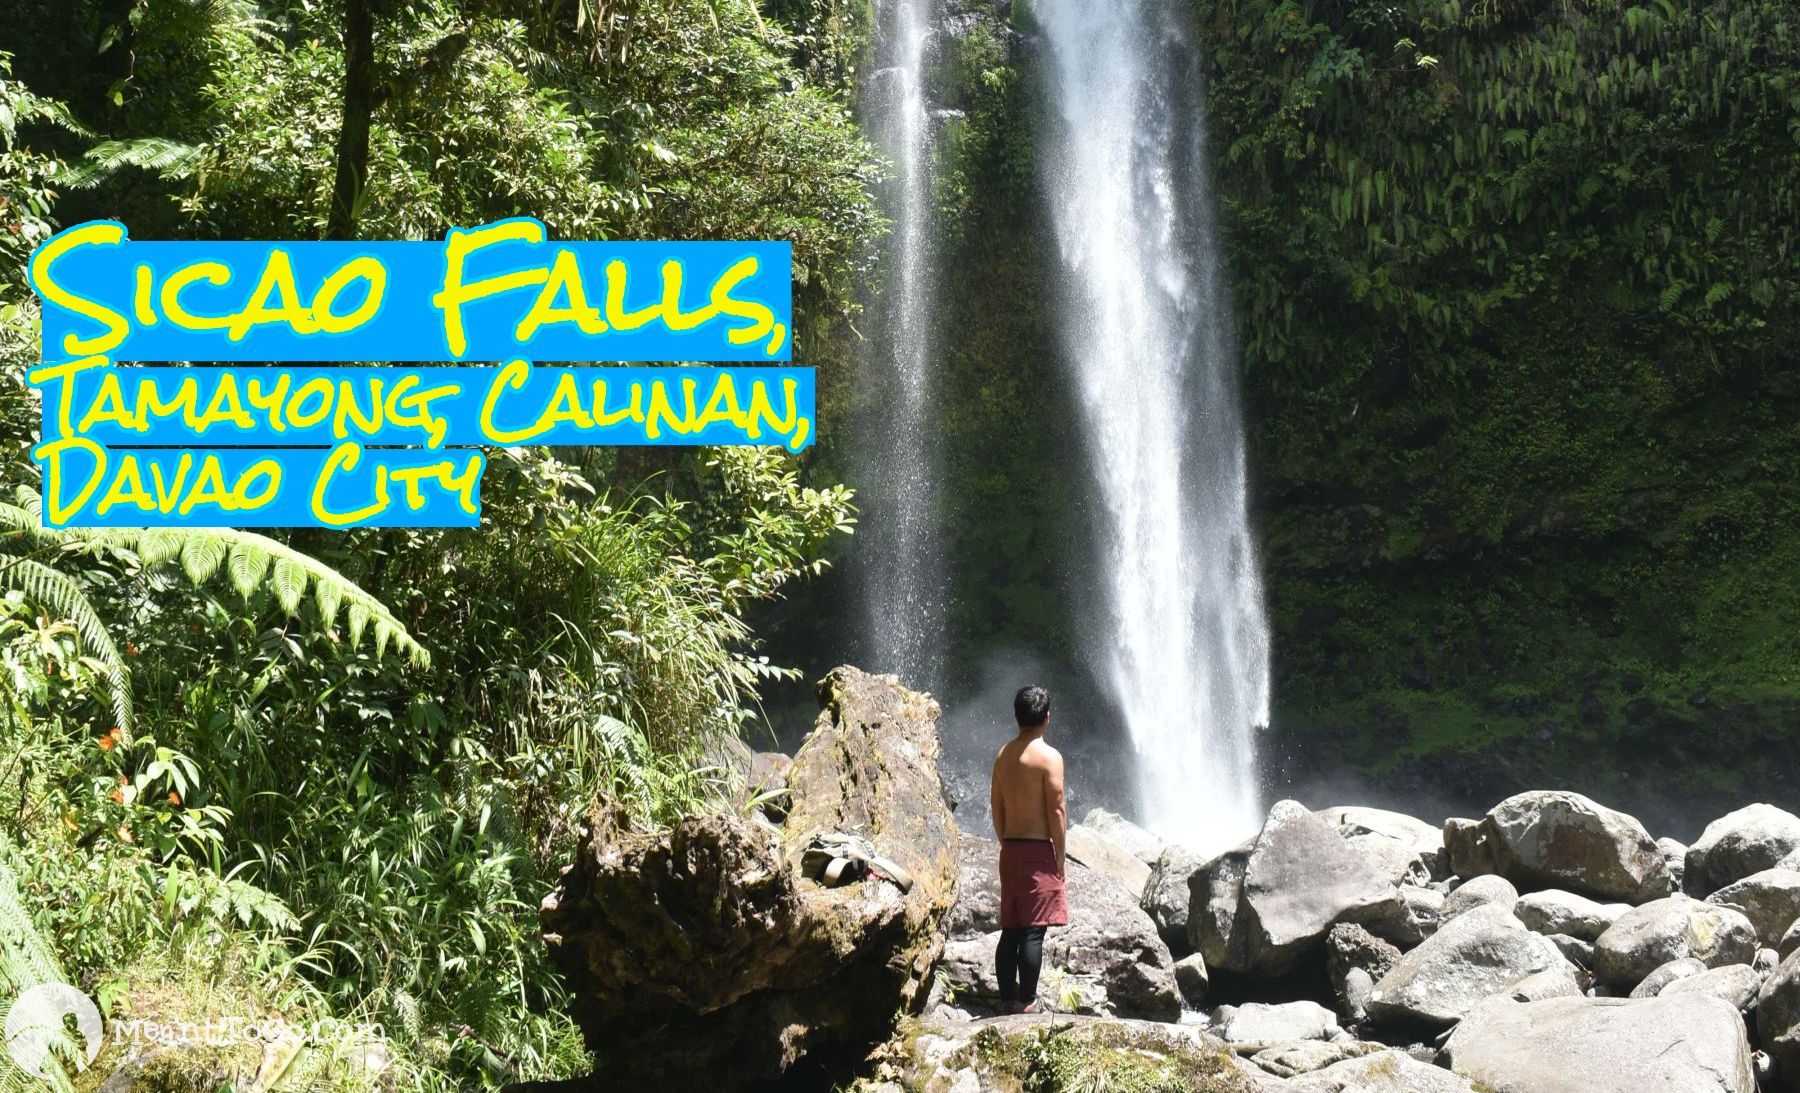 Sicao Falls Trekking Guide: Things You Need To Know Before Going To This Wonderful Attraction